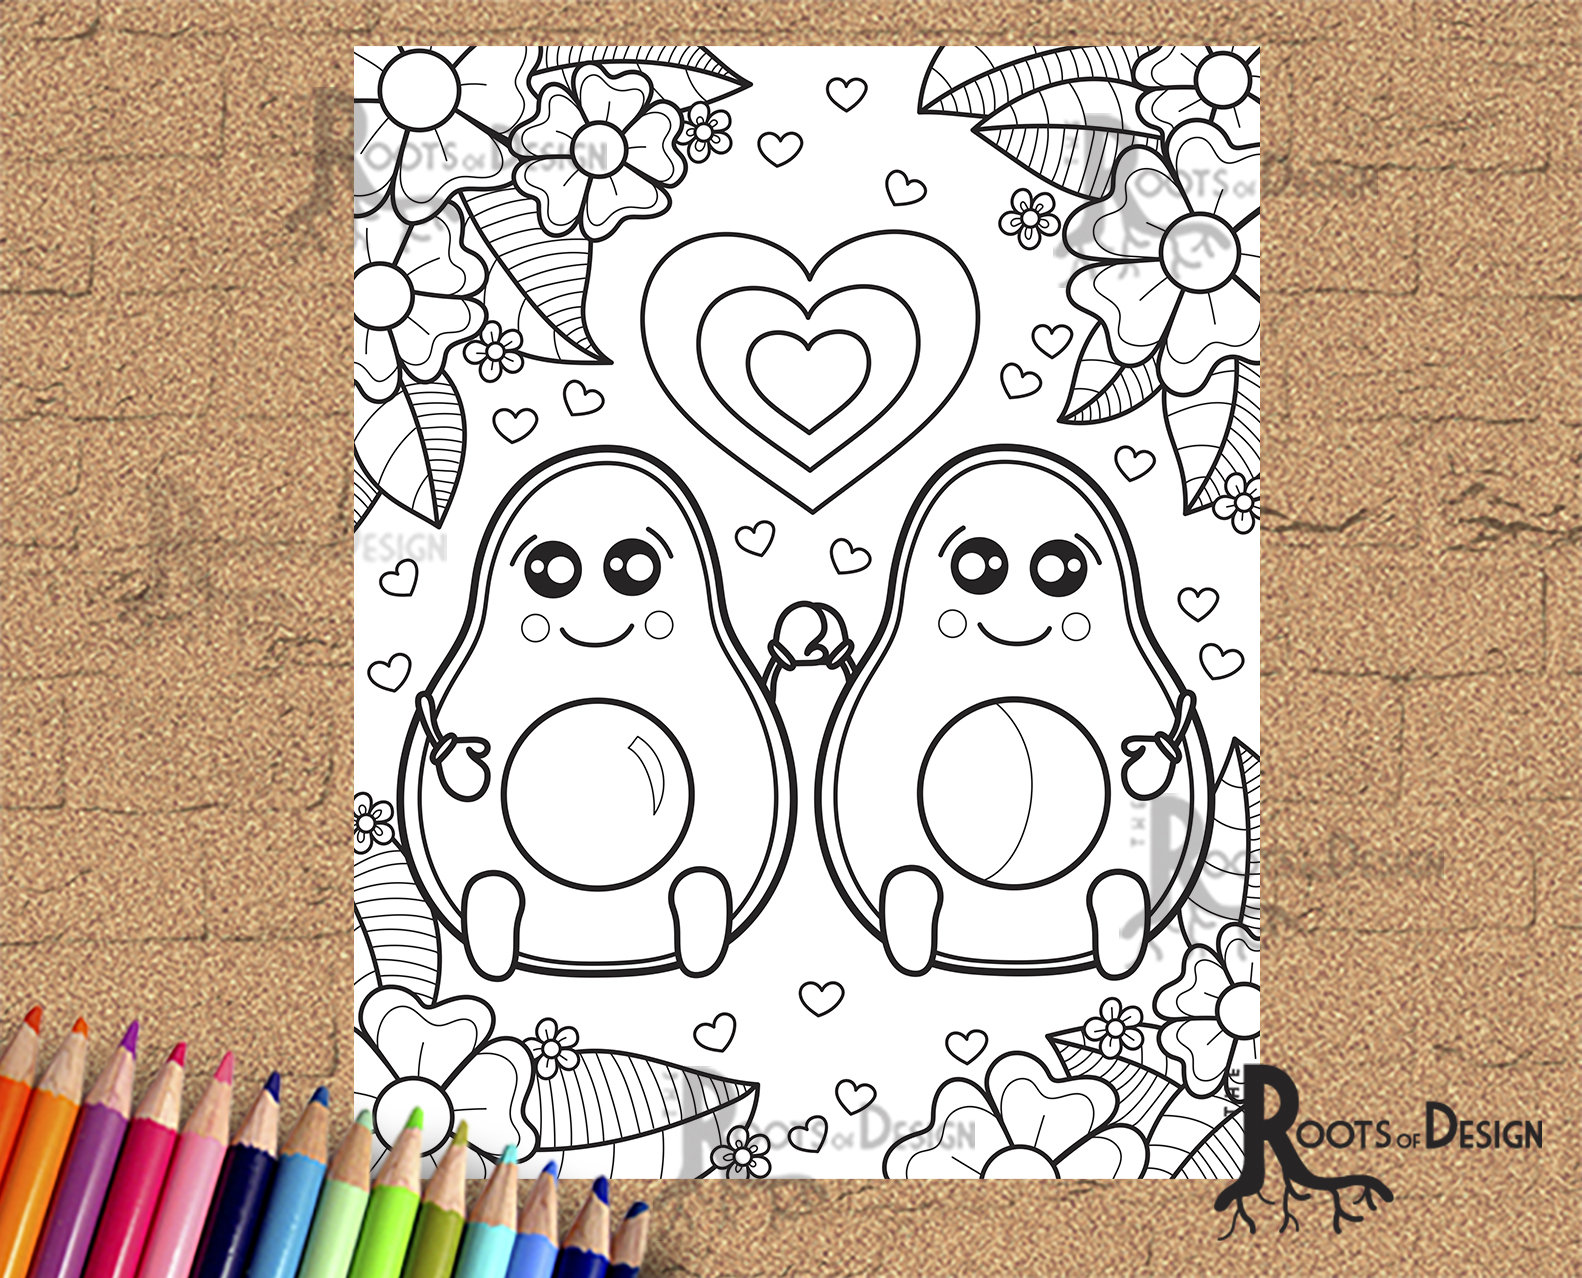 Instant download coloring avocado love art coloring page